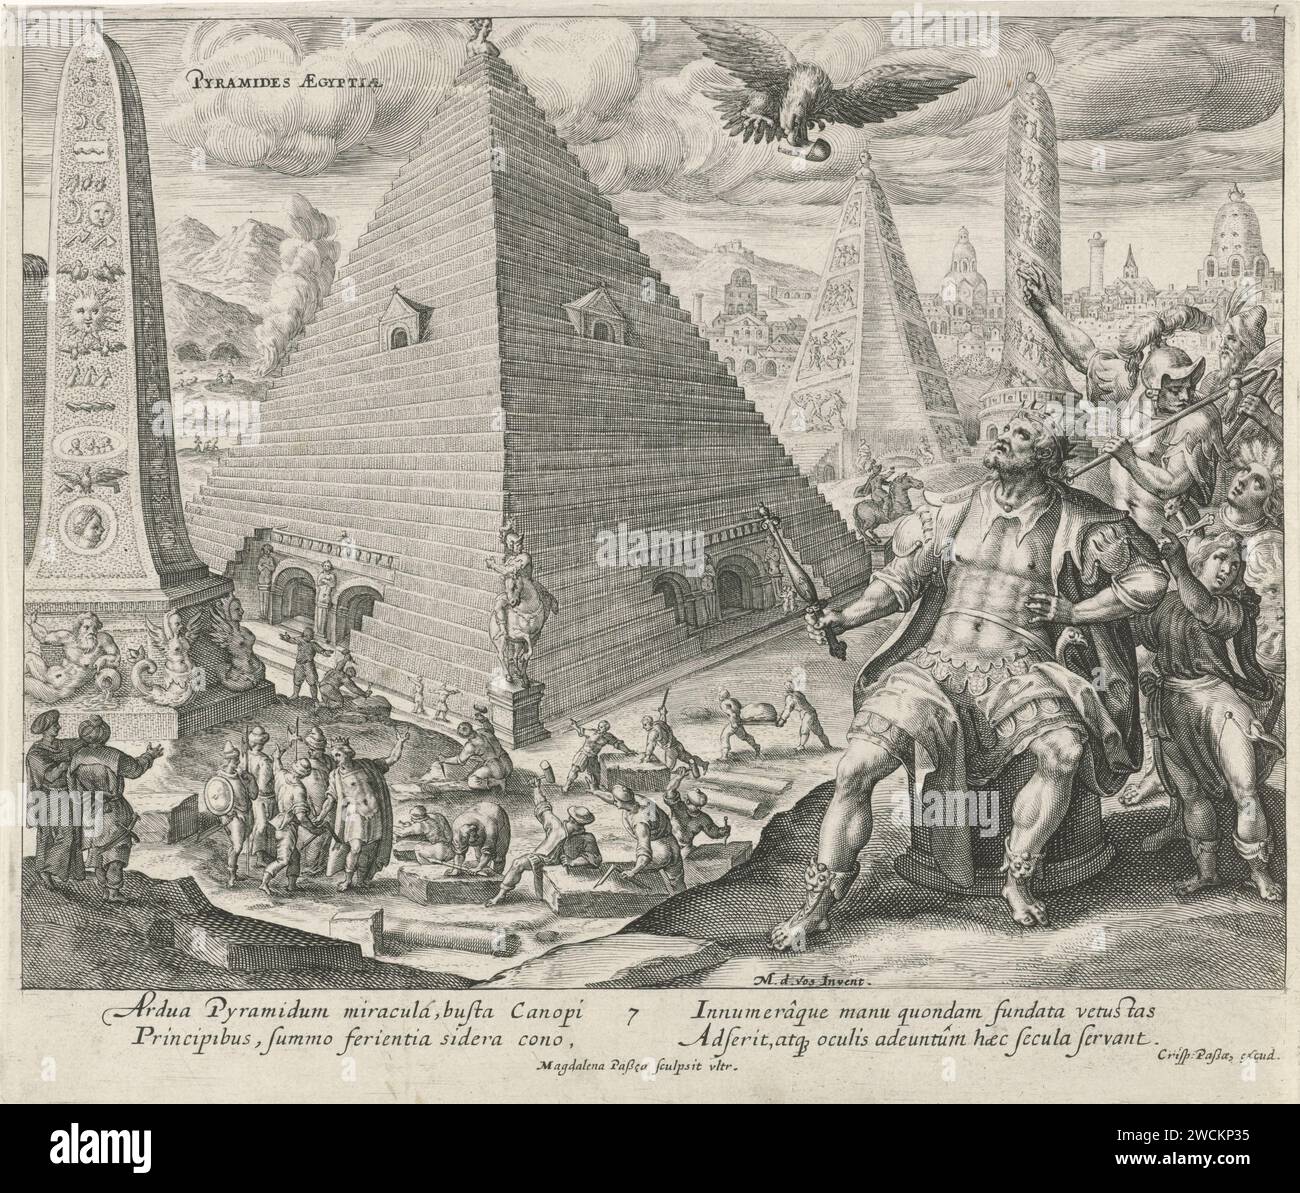 Pyramids of Egypt, Magdalena van de Passe, After Maerten de Vos, 1610 - 1638 print Various Egyptian pyramids and obelisks. Men made to slave scoop clay from the river, which is then baked into stones in a burning oven for the buildings. In the foreground, Pharaoh Psammetiches is on a stone block. He looks at an eagle with a sandal in his mouth (a reference to a fable of Aesopus about the relationship between Rhodopis, a young Egyptian woman, and the pharaoh). In the margin a caption in Latin. Print from a series with the seven wonders of the world. Utrecht paper engraving Egyptian pyramids (Wo Stock Photo